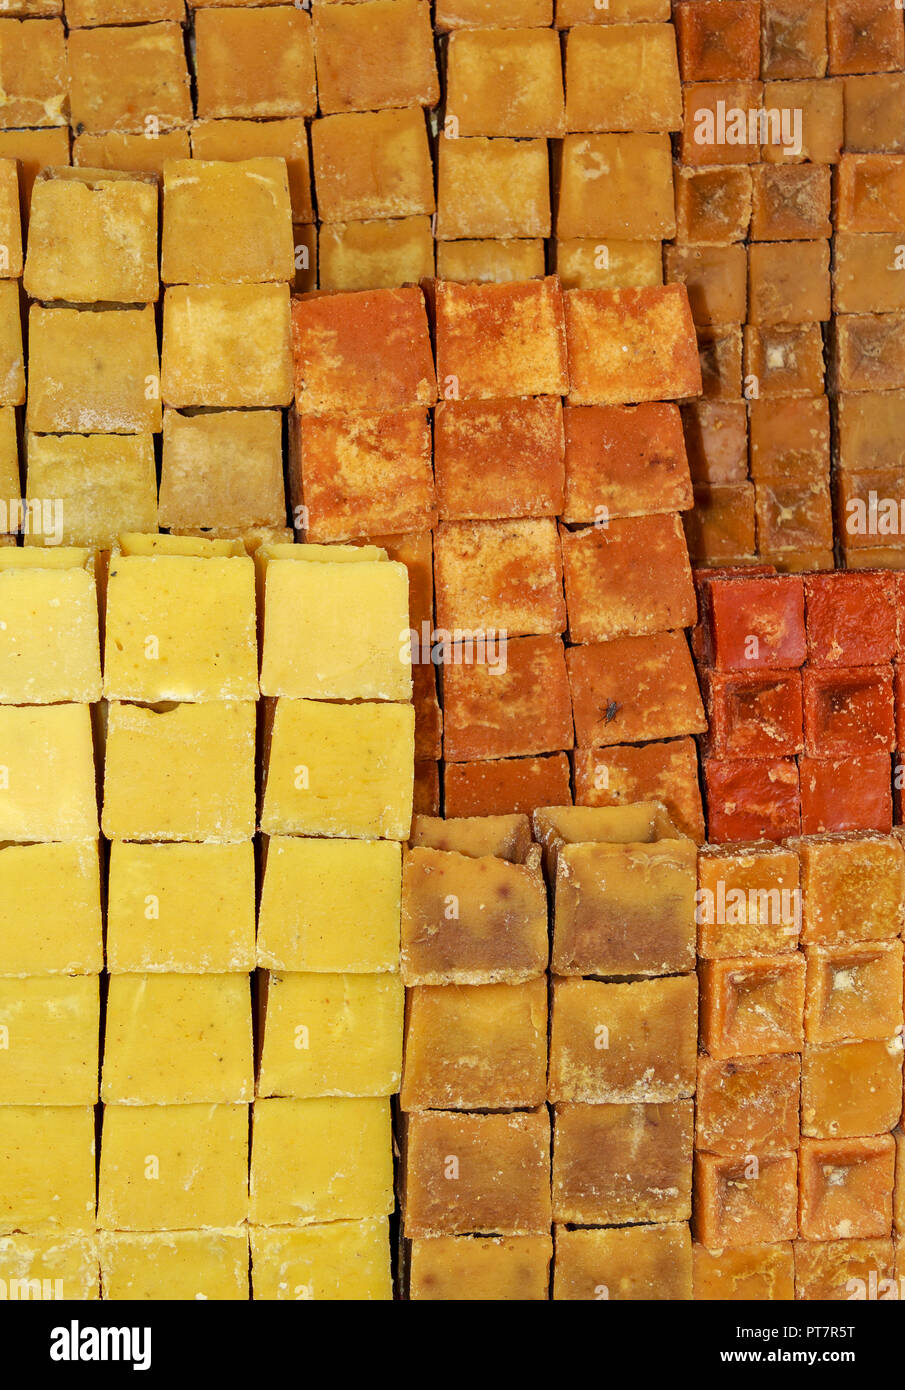 JAGGERY CANE SUGAR BLOCKS STACKED ON A STALL IN INDIA Stock Photo